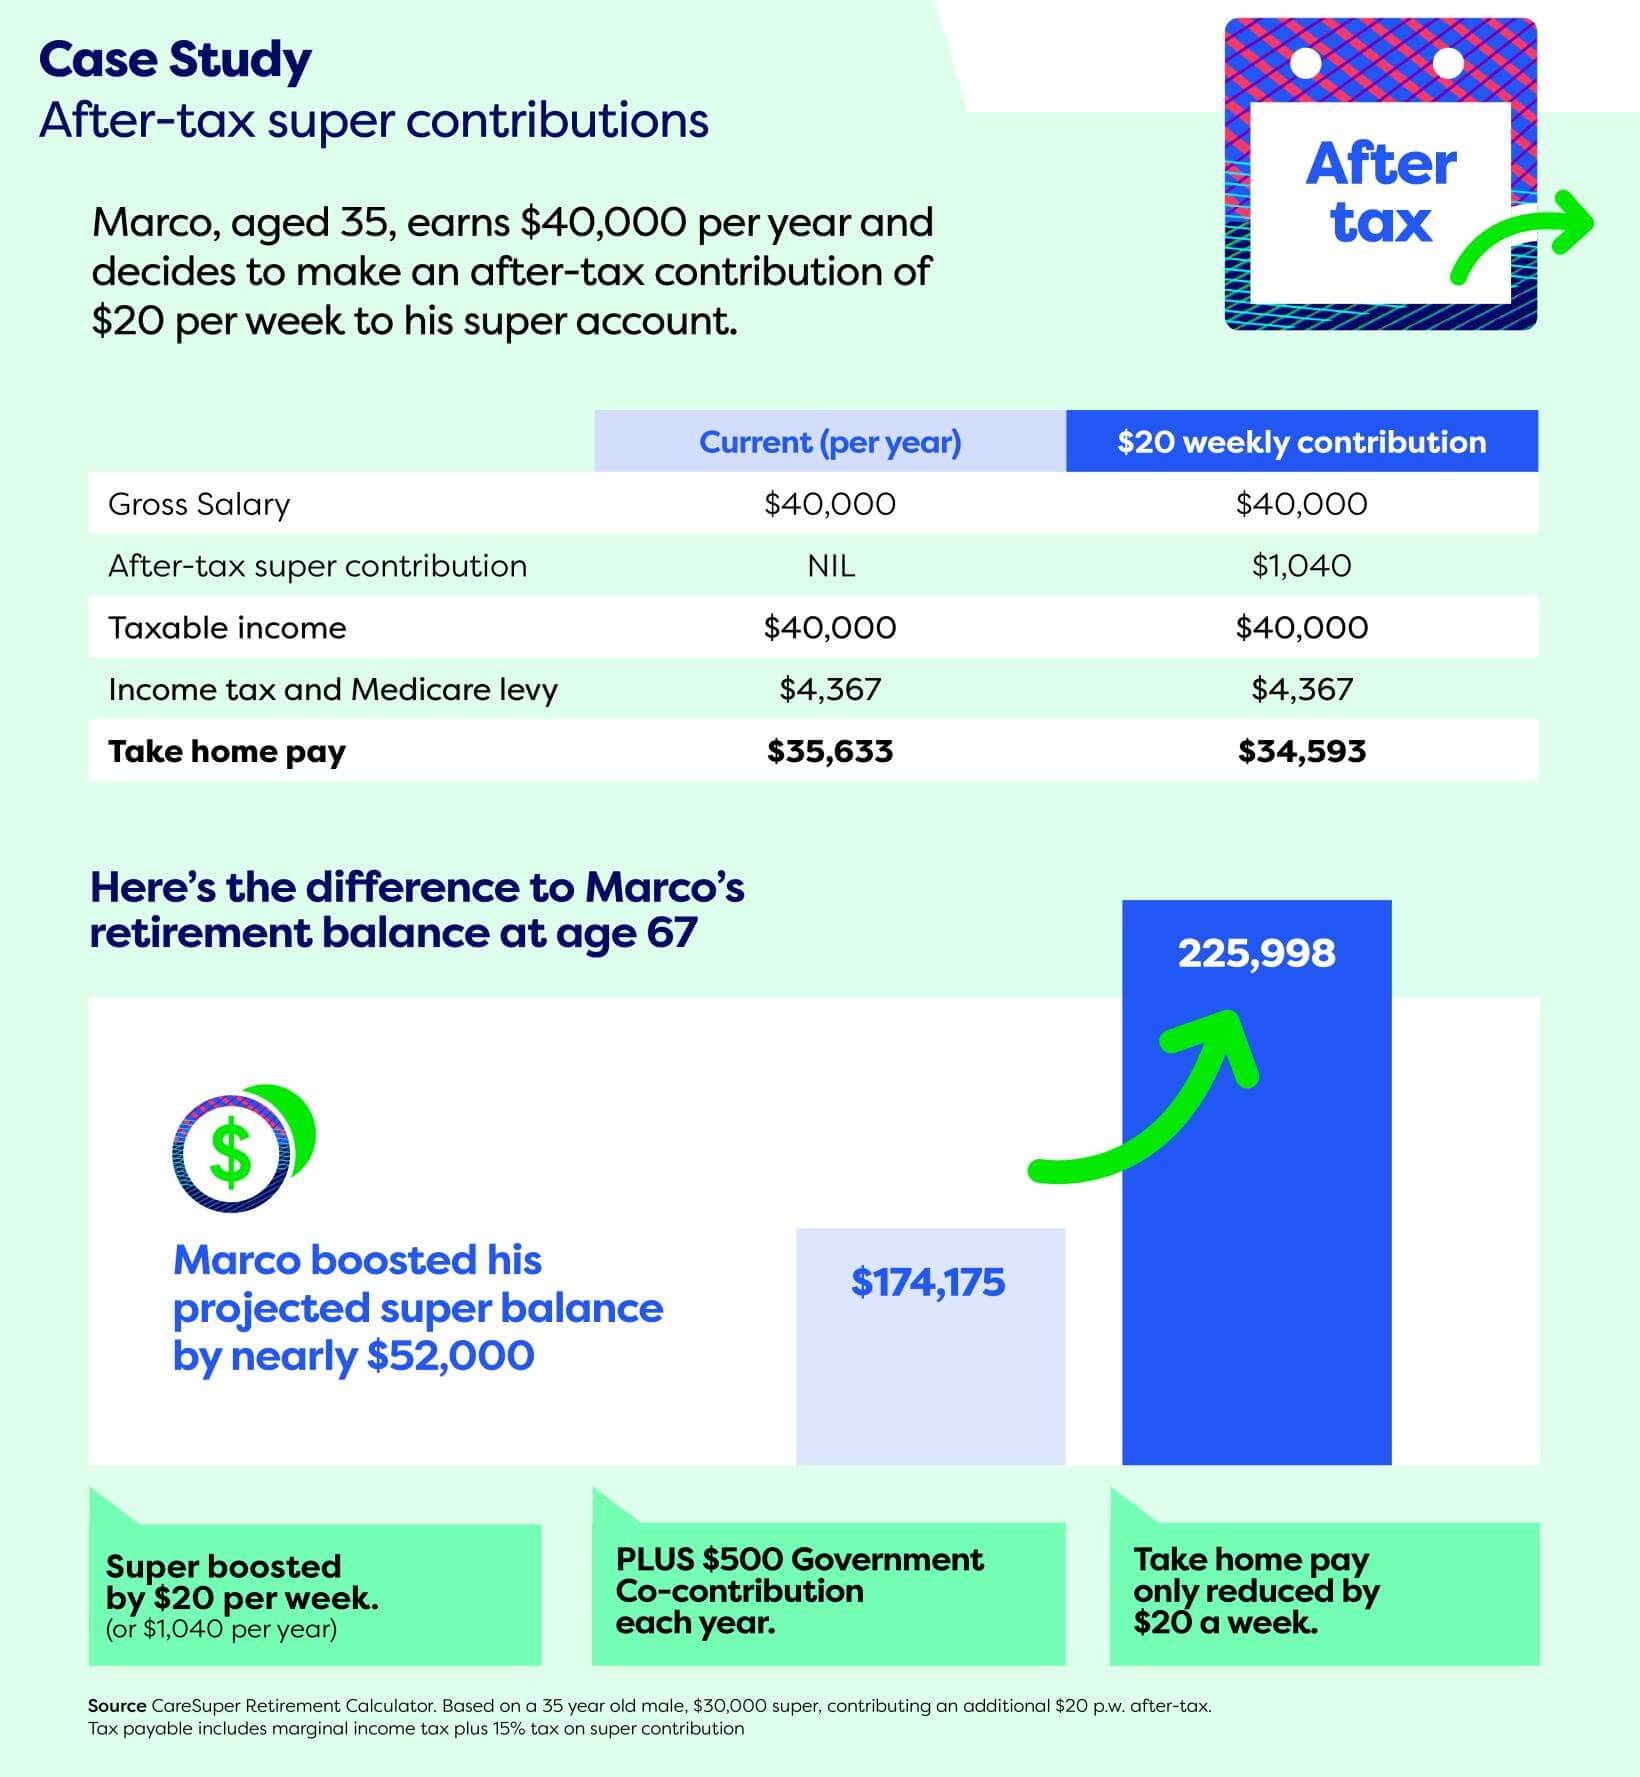 After-tax superannuation contributions